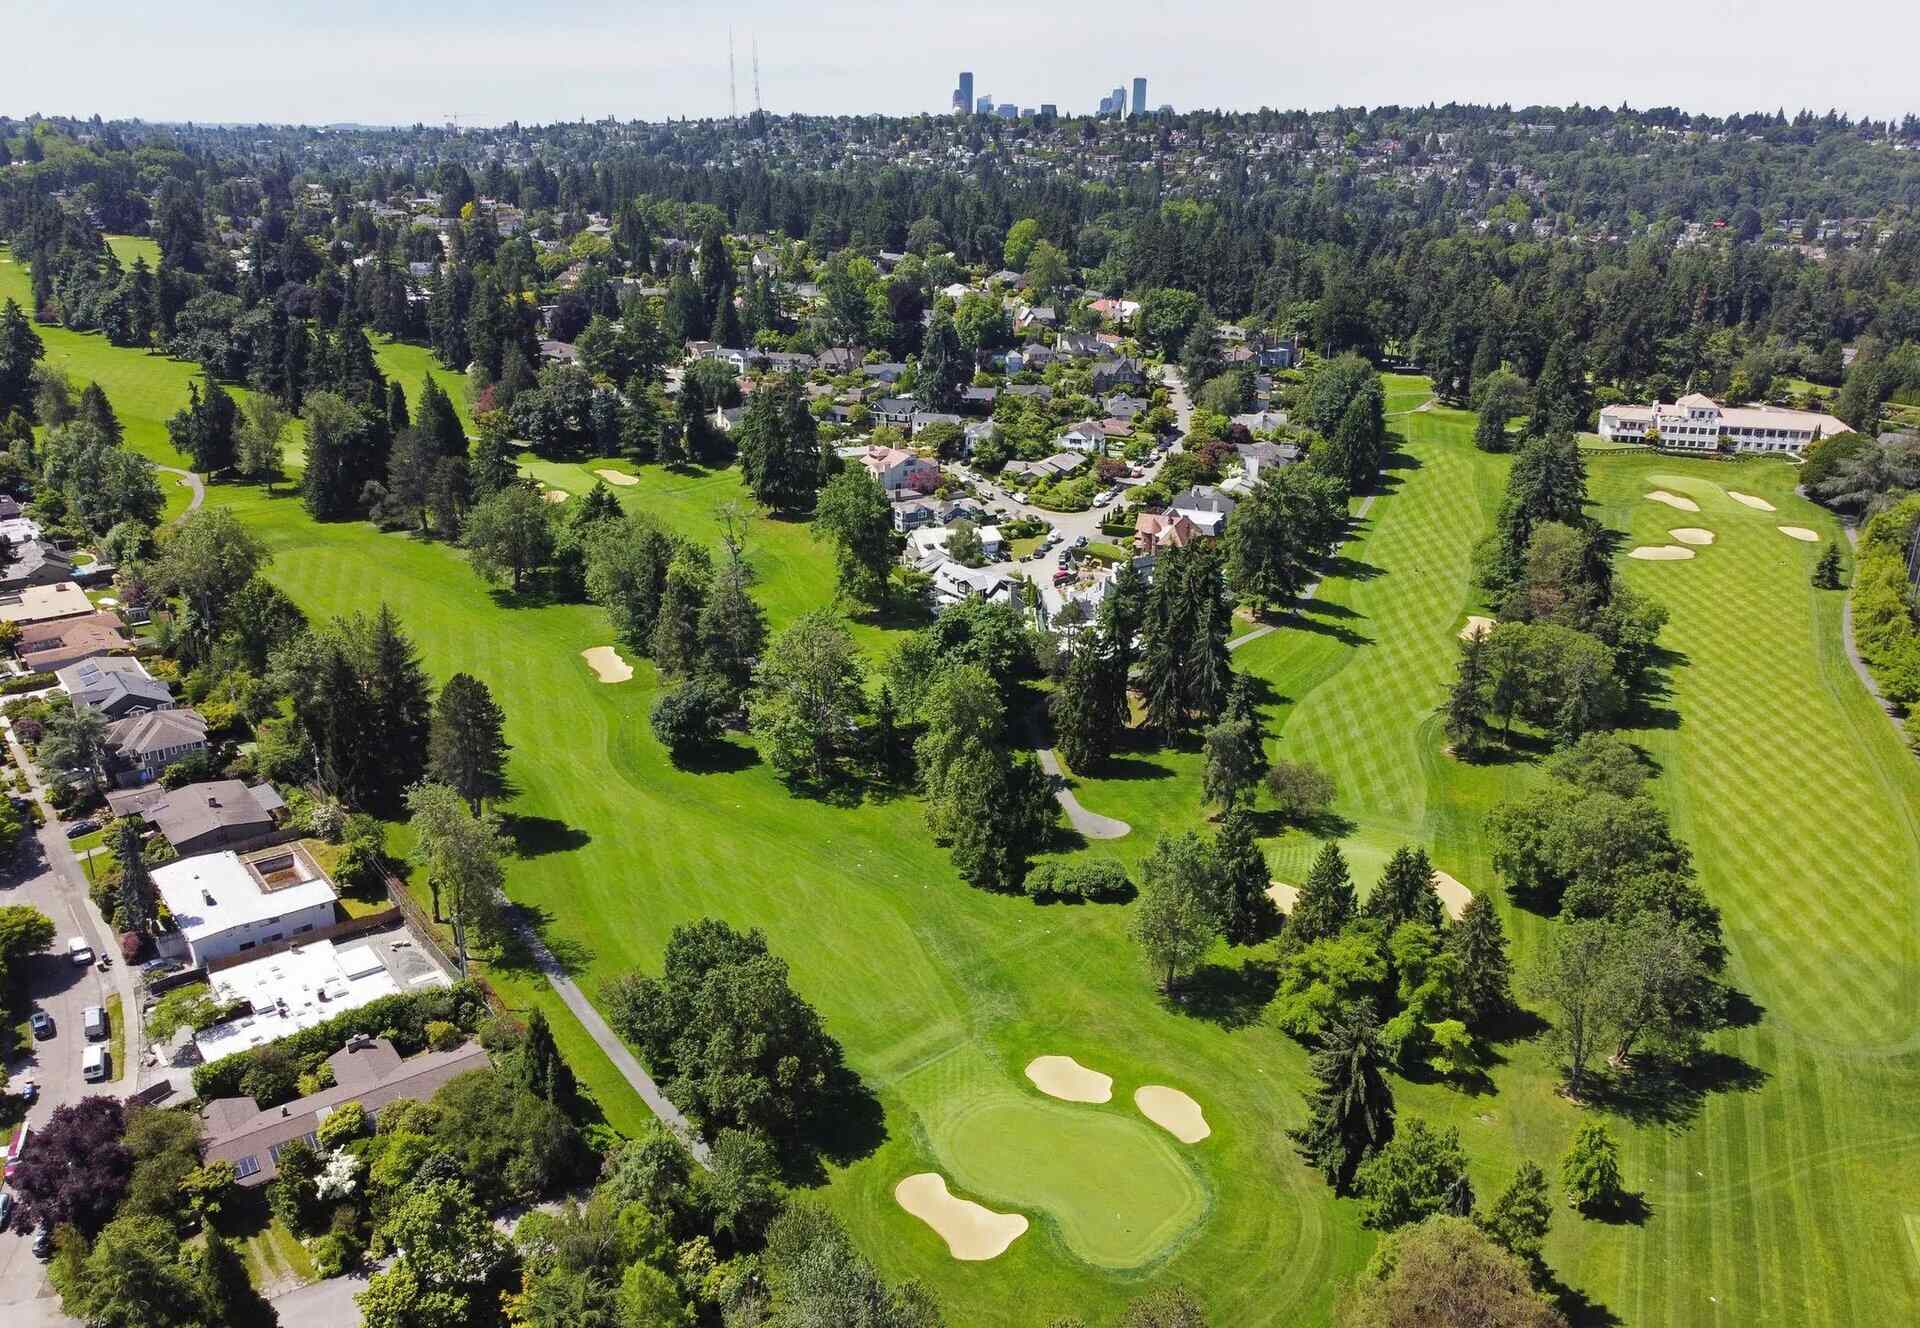 Understanding Property Assessment By A Management Company In A Golf Community